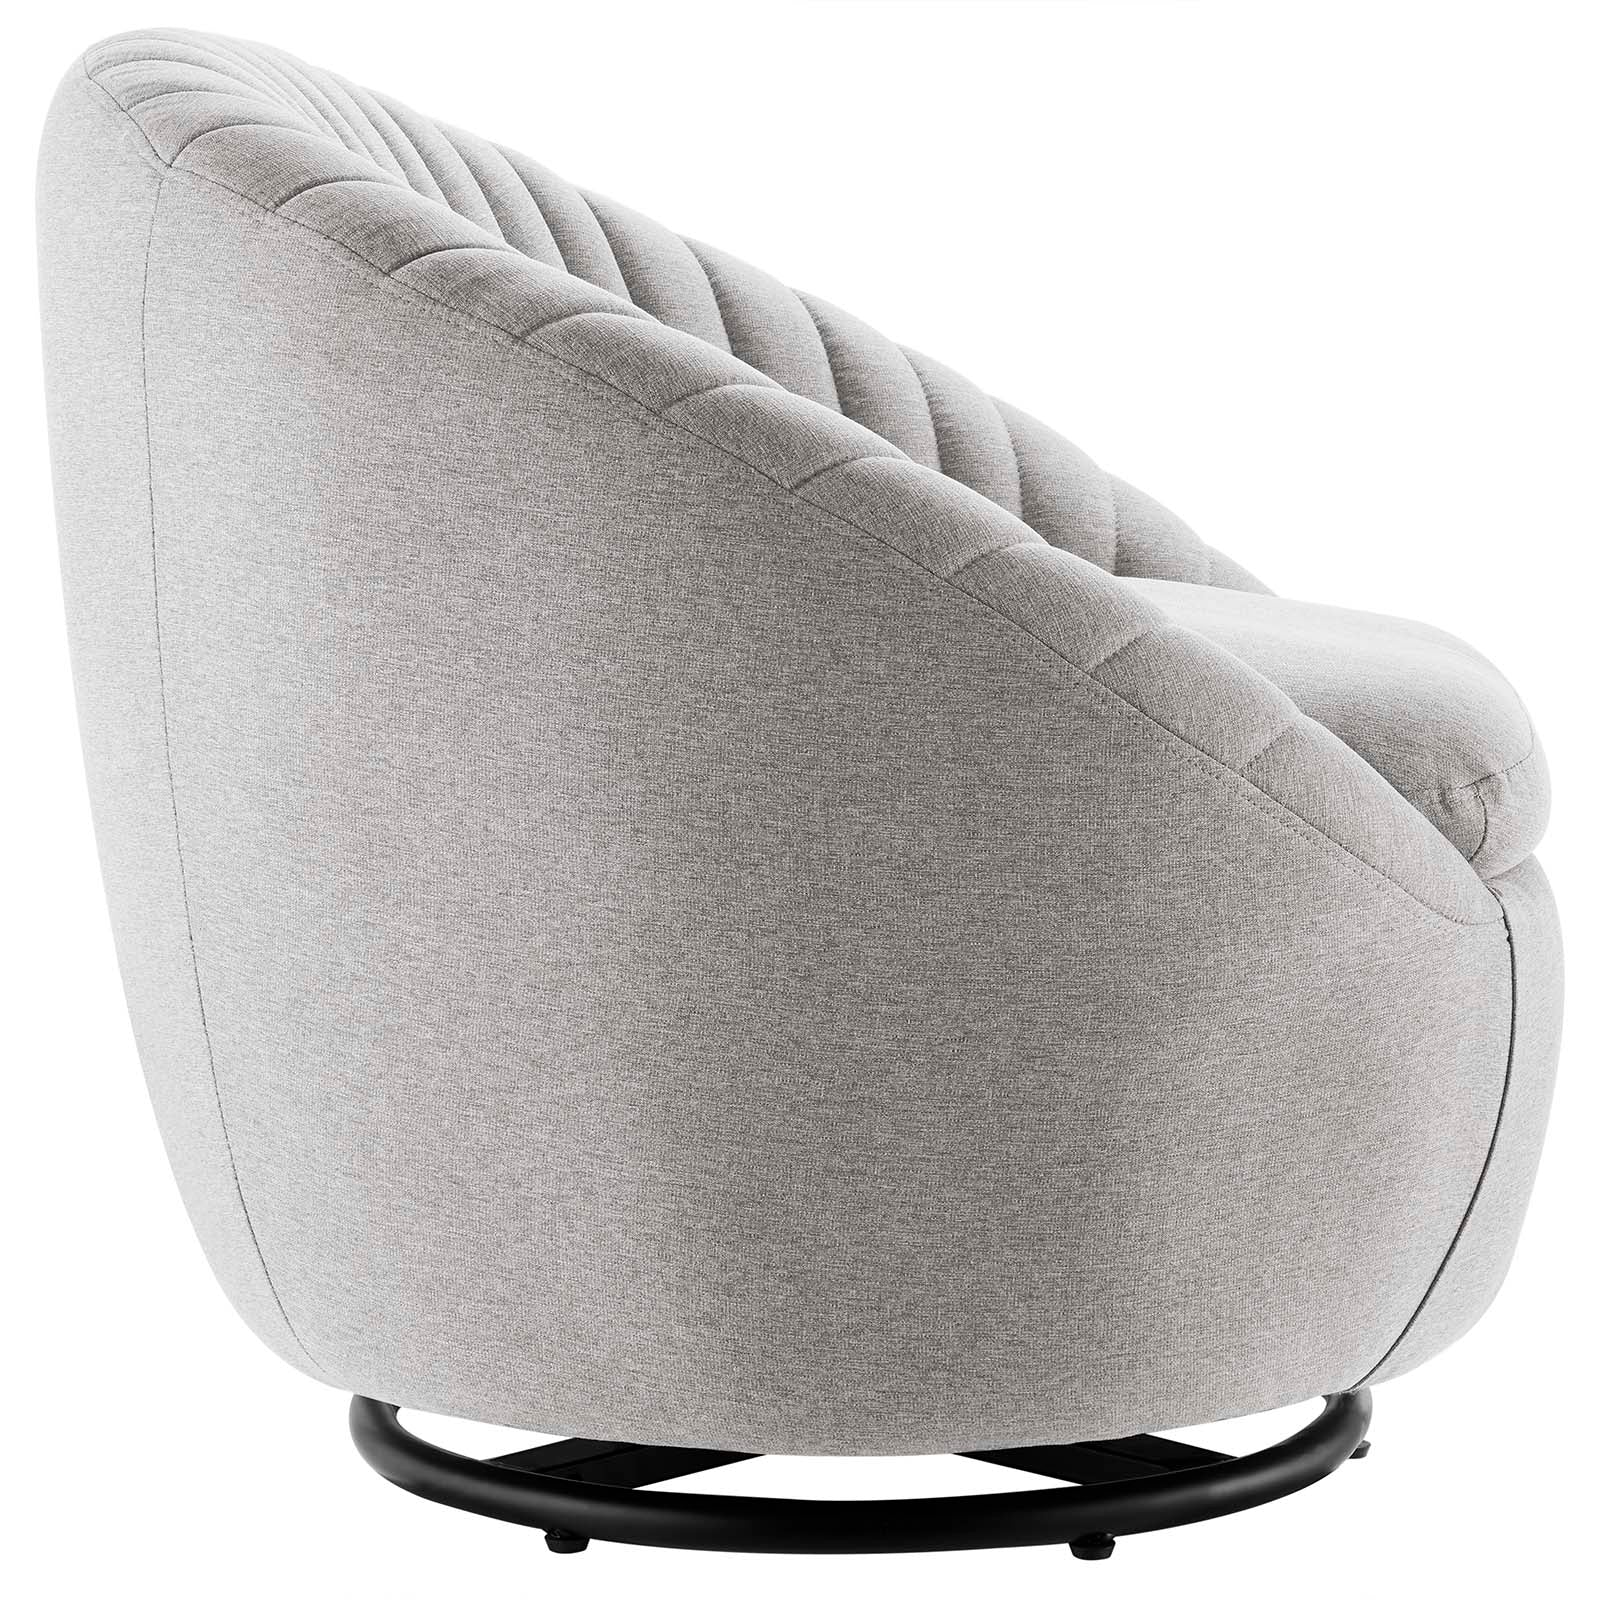 Whirr Tufted Fabric Fabric Swivel Chair - East Shore Modern Home Furnishings